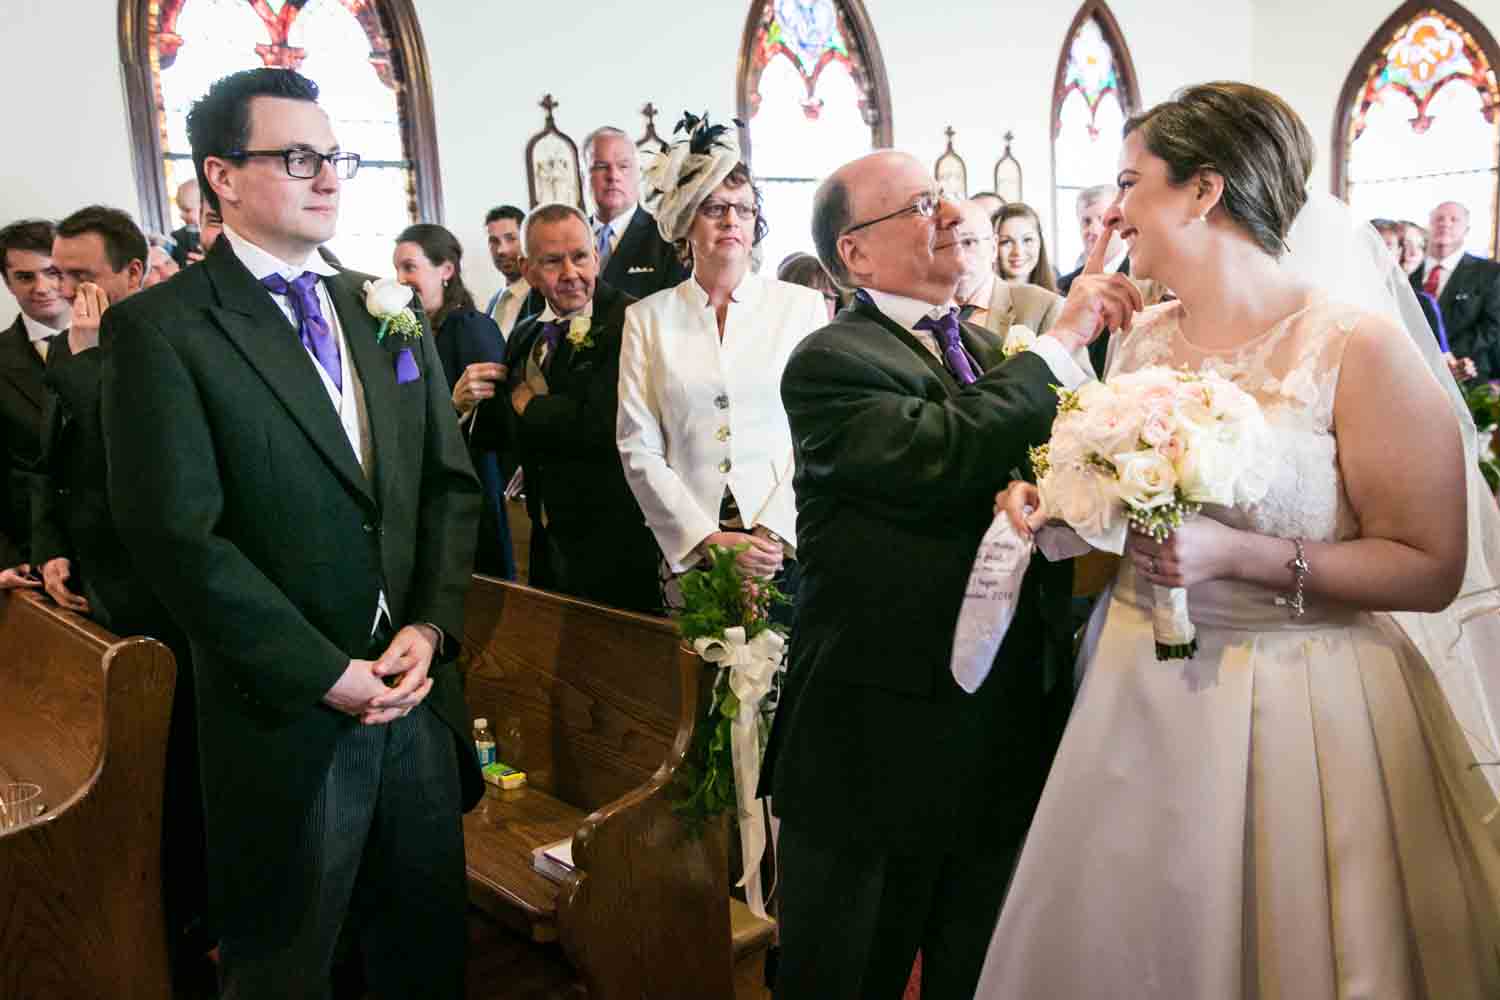 Father giving bride away during ceremony at St. James Church